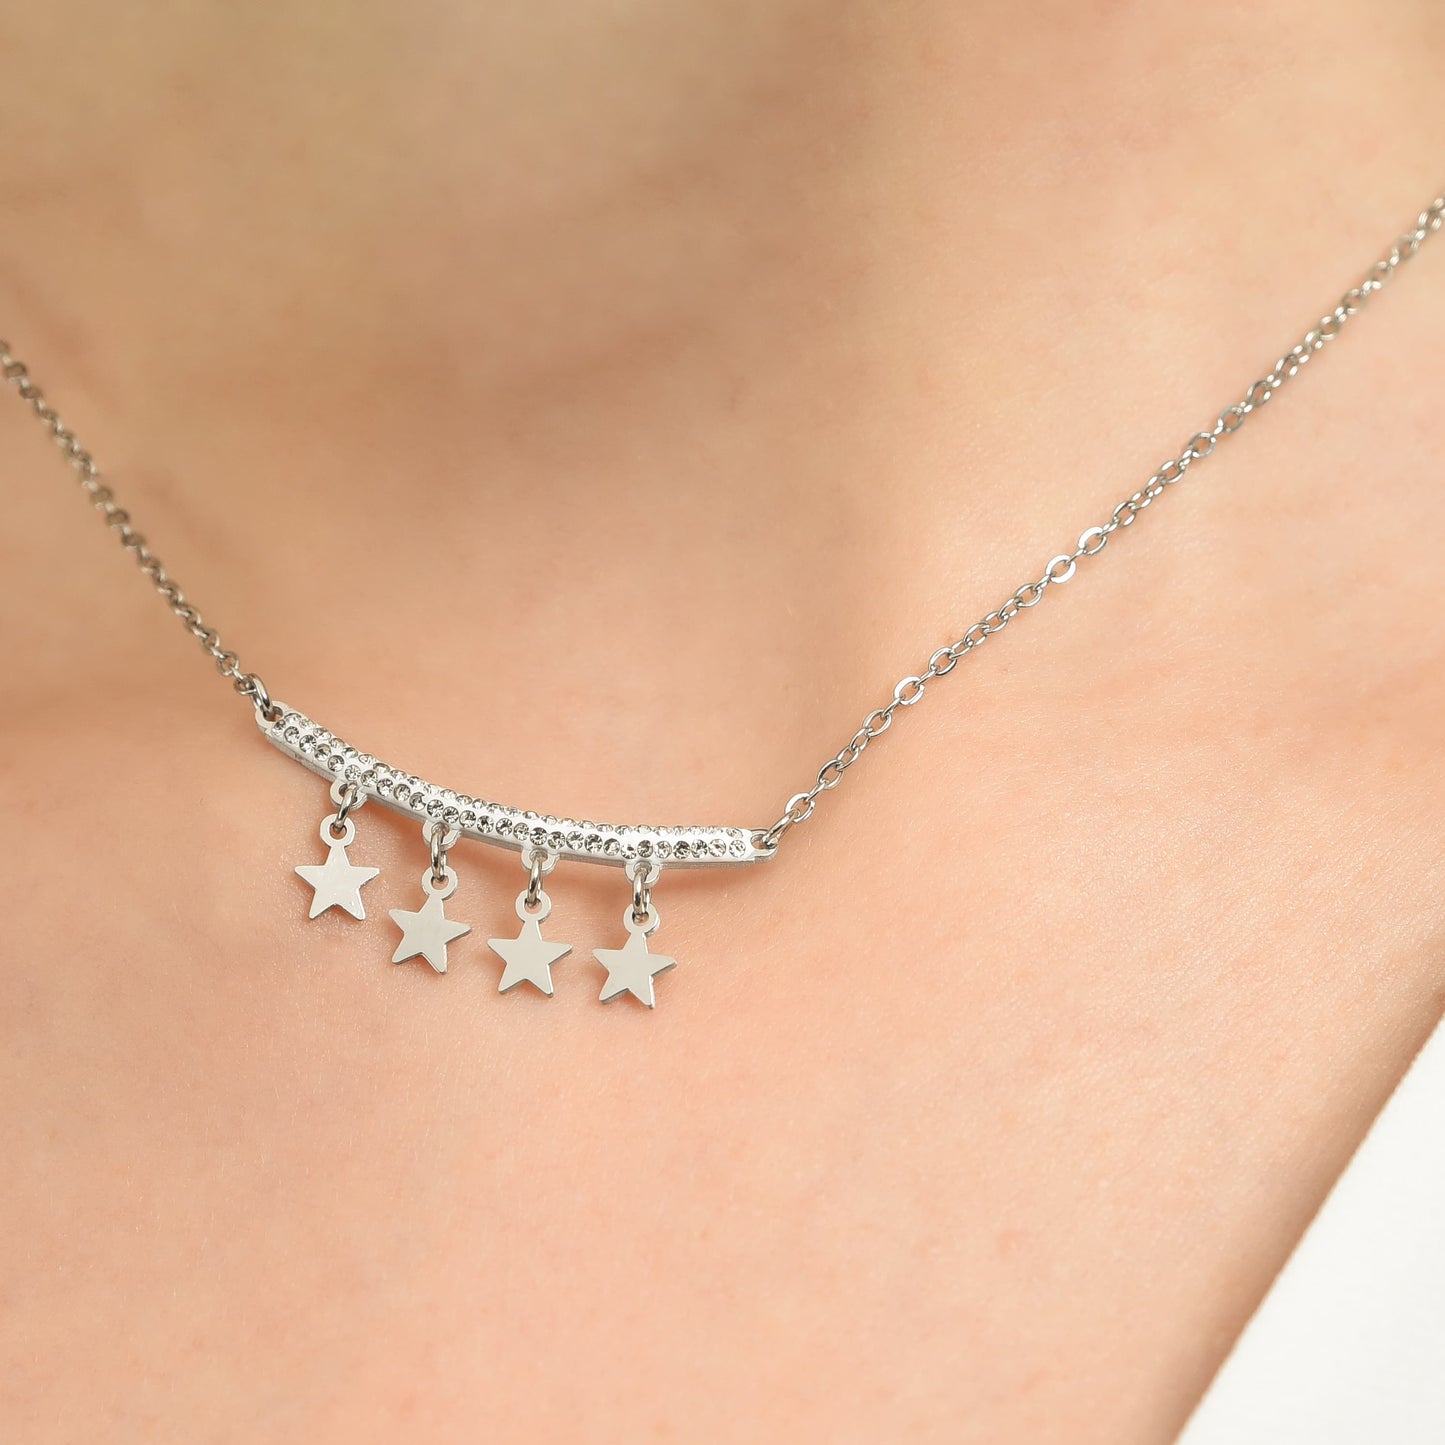 WOMAN'S NECKLACE IN STEEL WITH STARS STONES Luca Barra